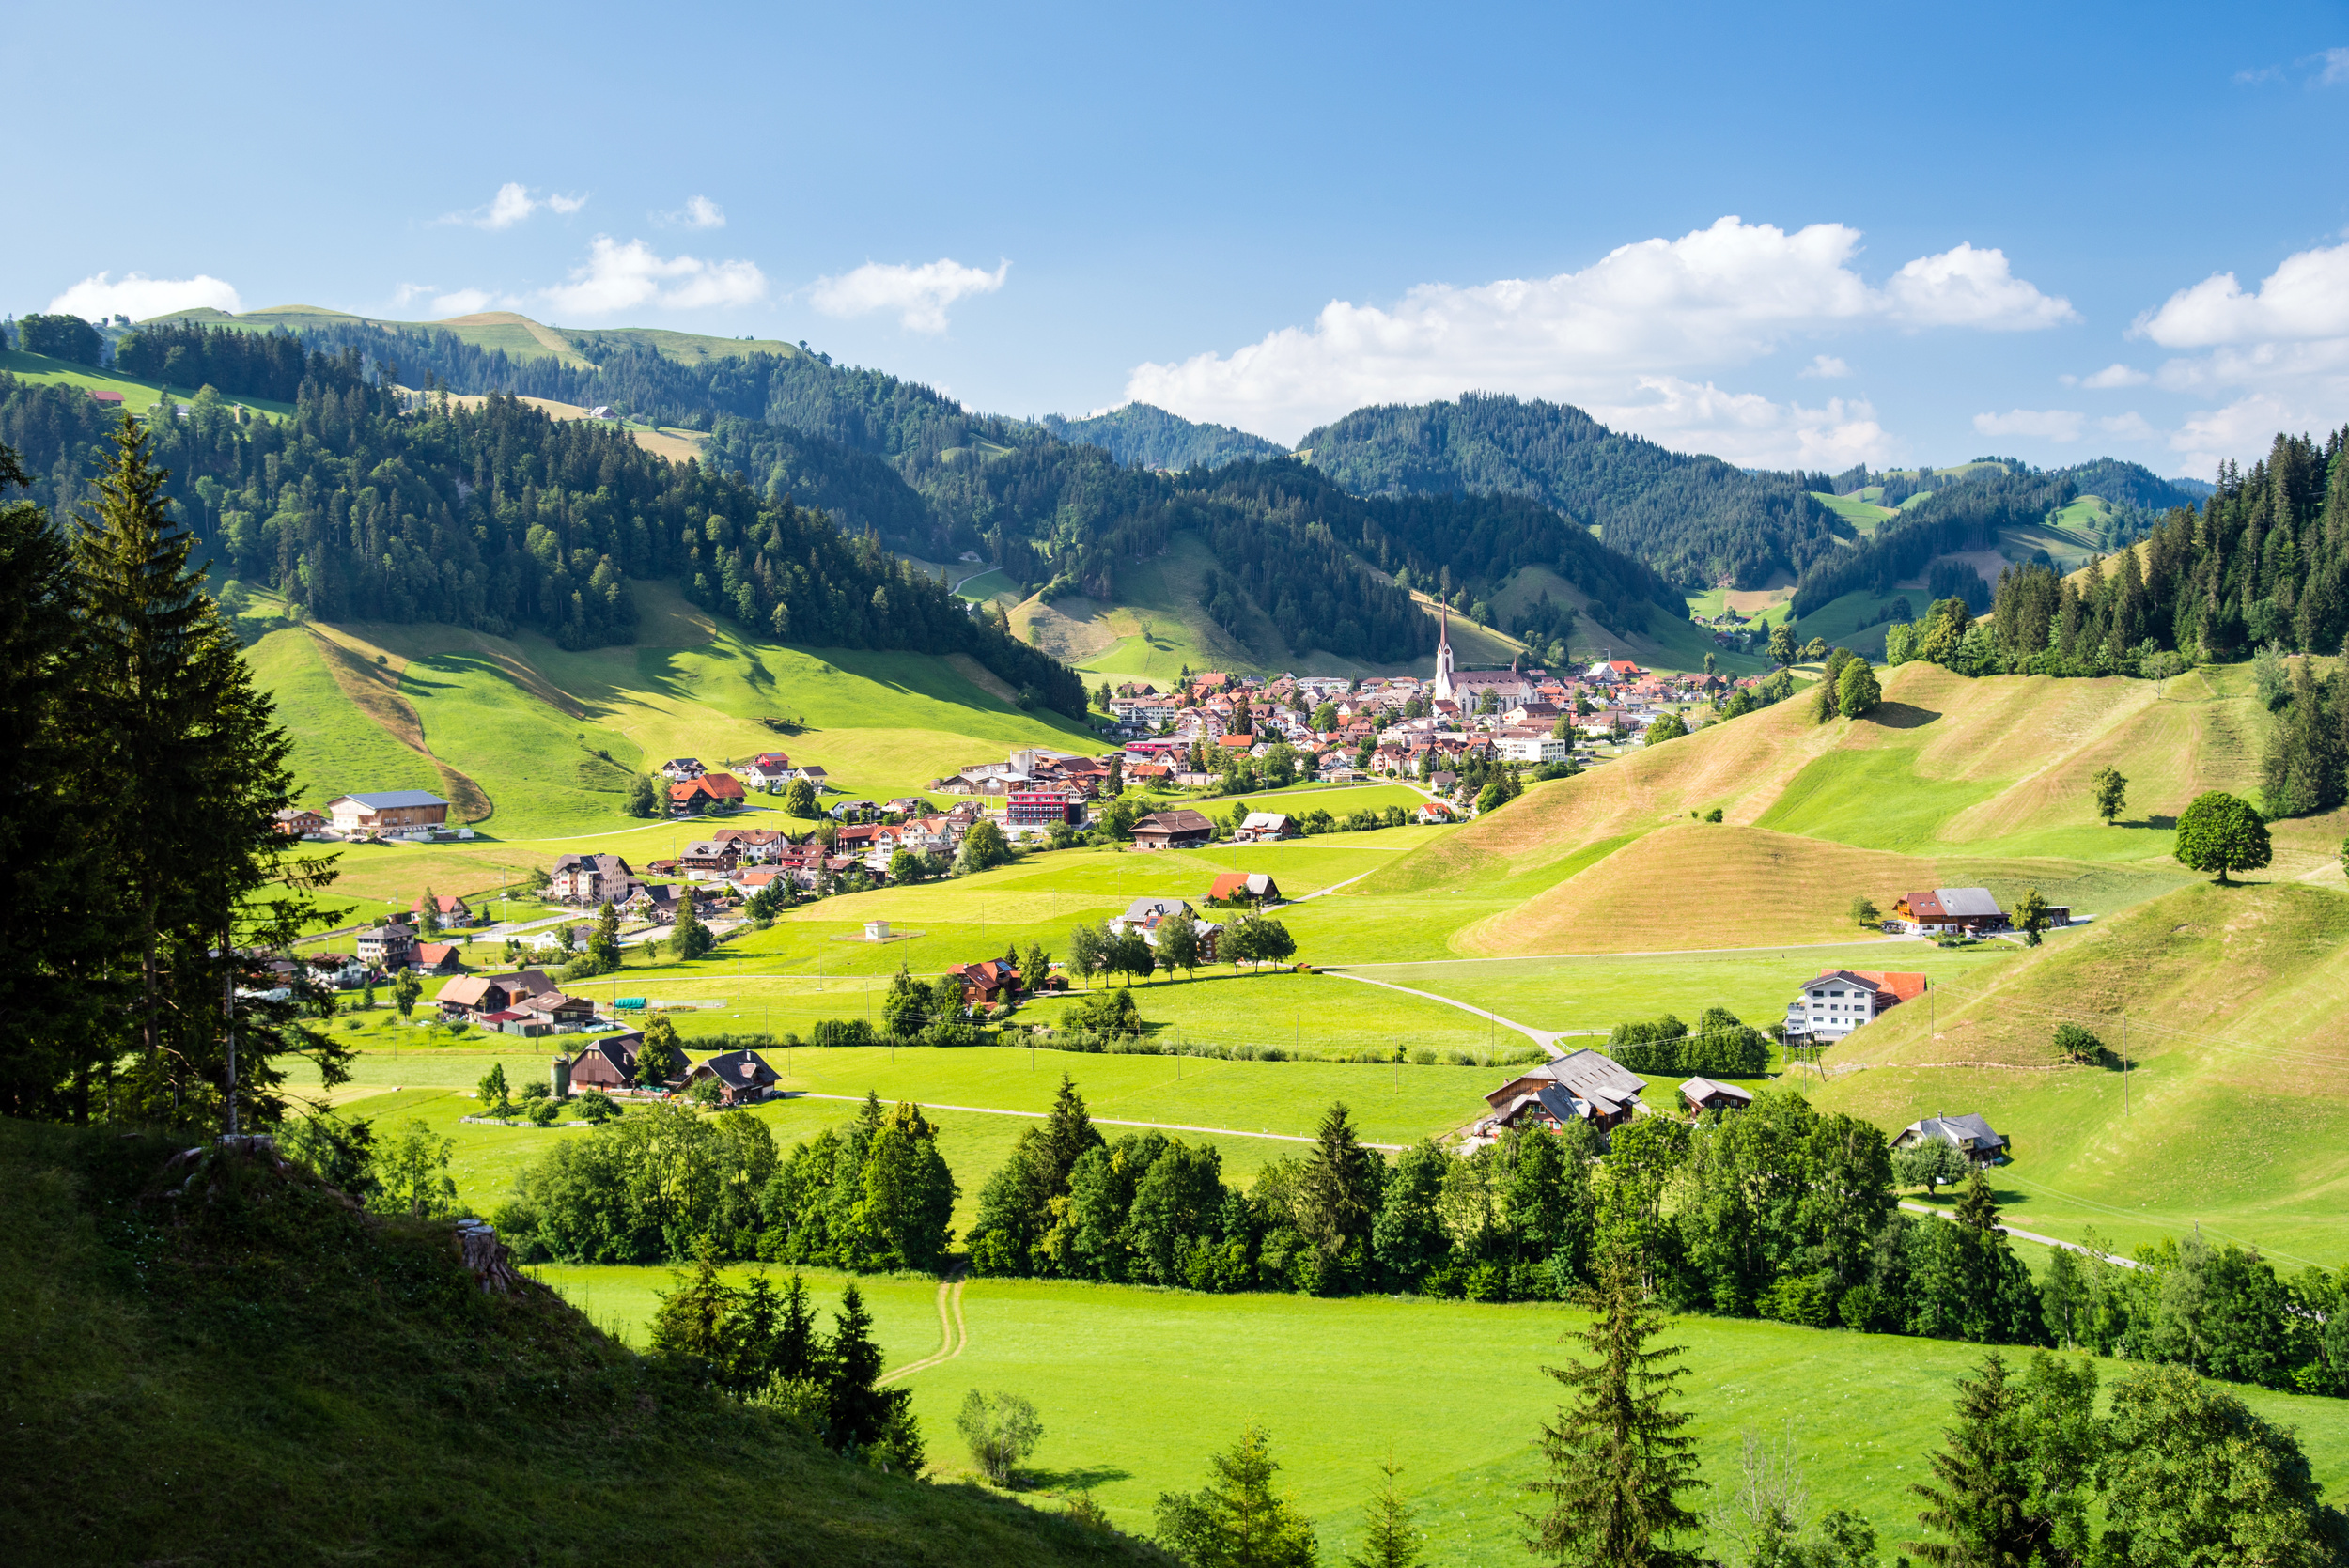 <p>This small Swiss hamlet in the mountains is a popular escape for outdoors enthusiasts throughout the seasons. It’s also where Emmental, which Americans often just refer to as “Swiss", cheese originates.</p><p><a href='https://www.msn.com/en-us/community/channel/vid-cj9pqbr0vn9in2b6ddcd8sfgpfq6x6utp44fssrv6mc2gtybw0us'>Follow us on MSN to see more of our exclusive lifestyle content.</a></p>